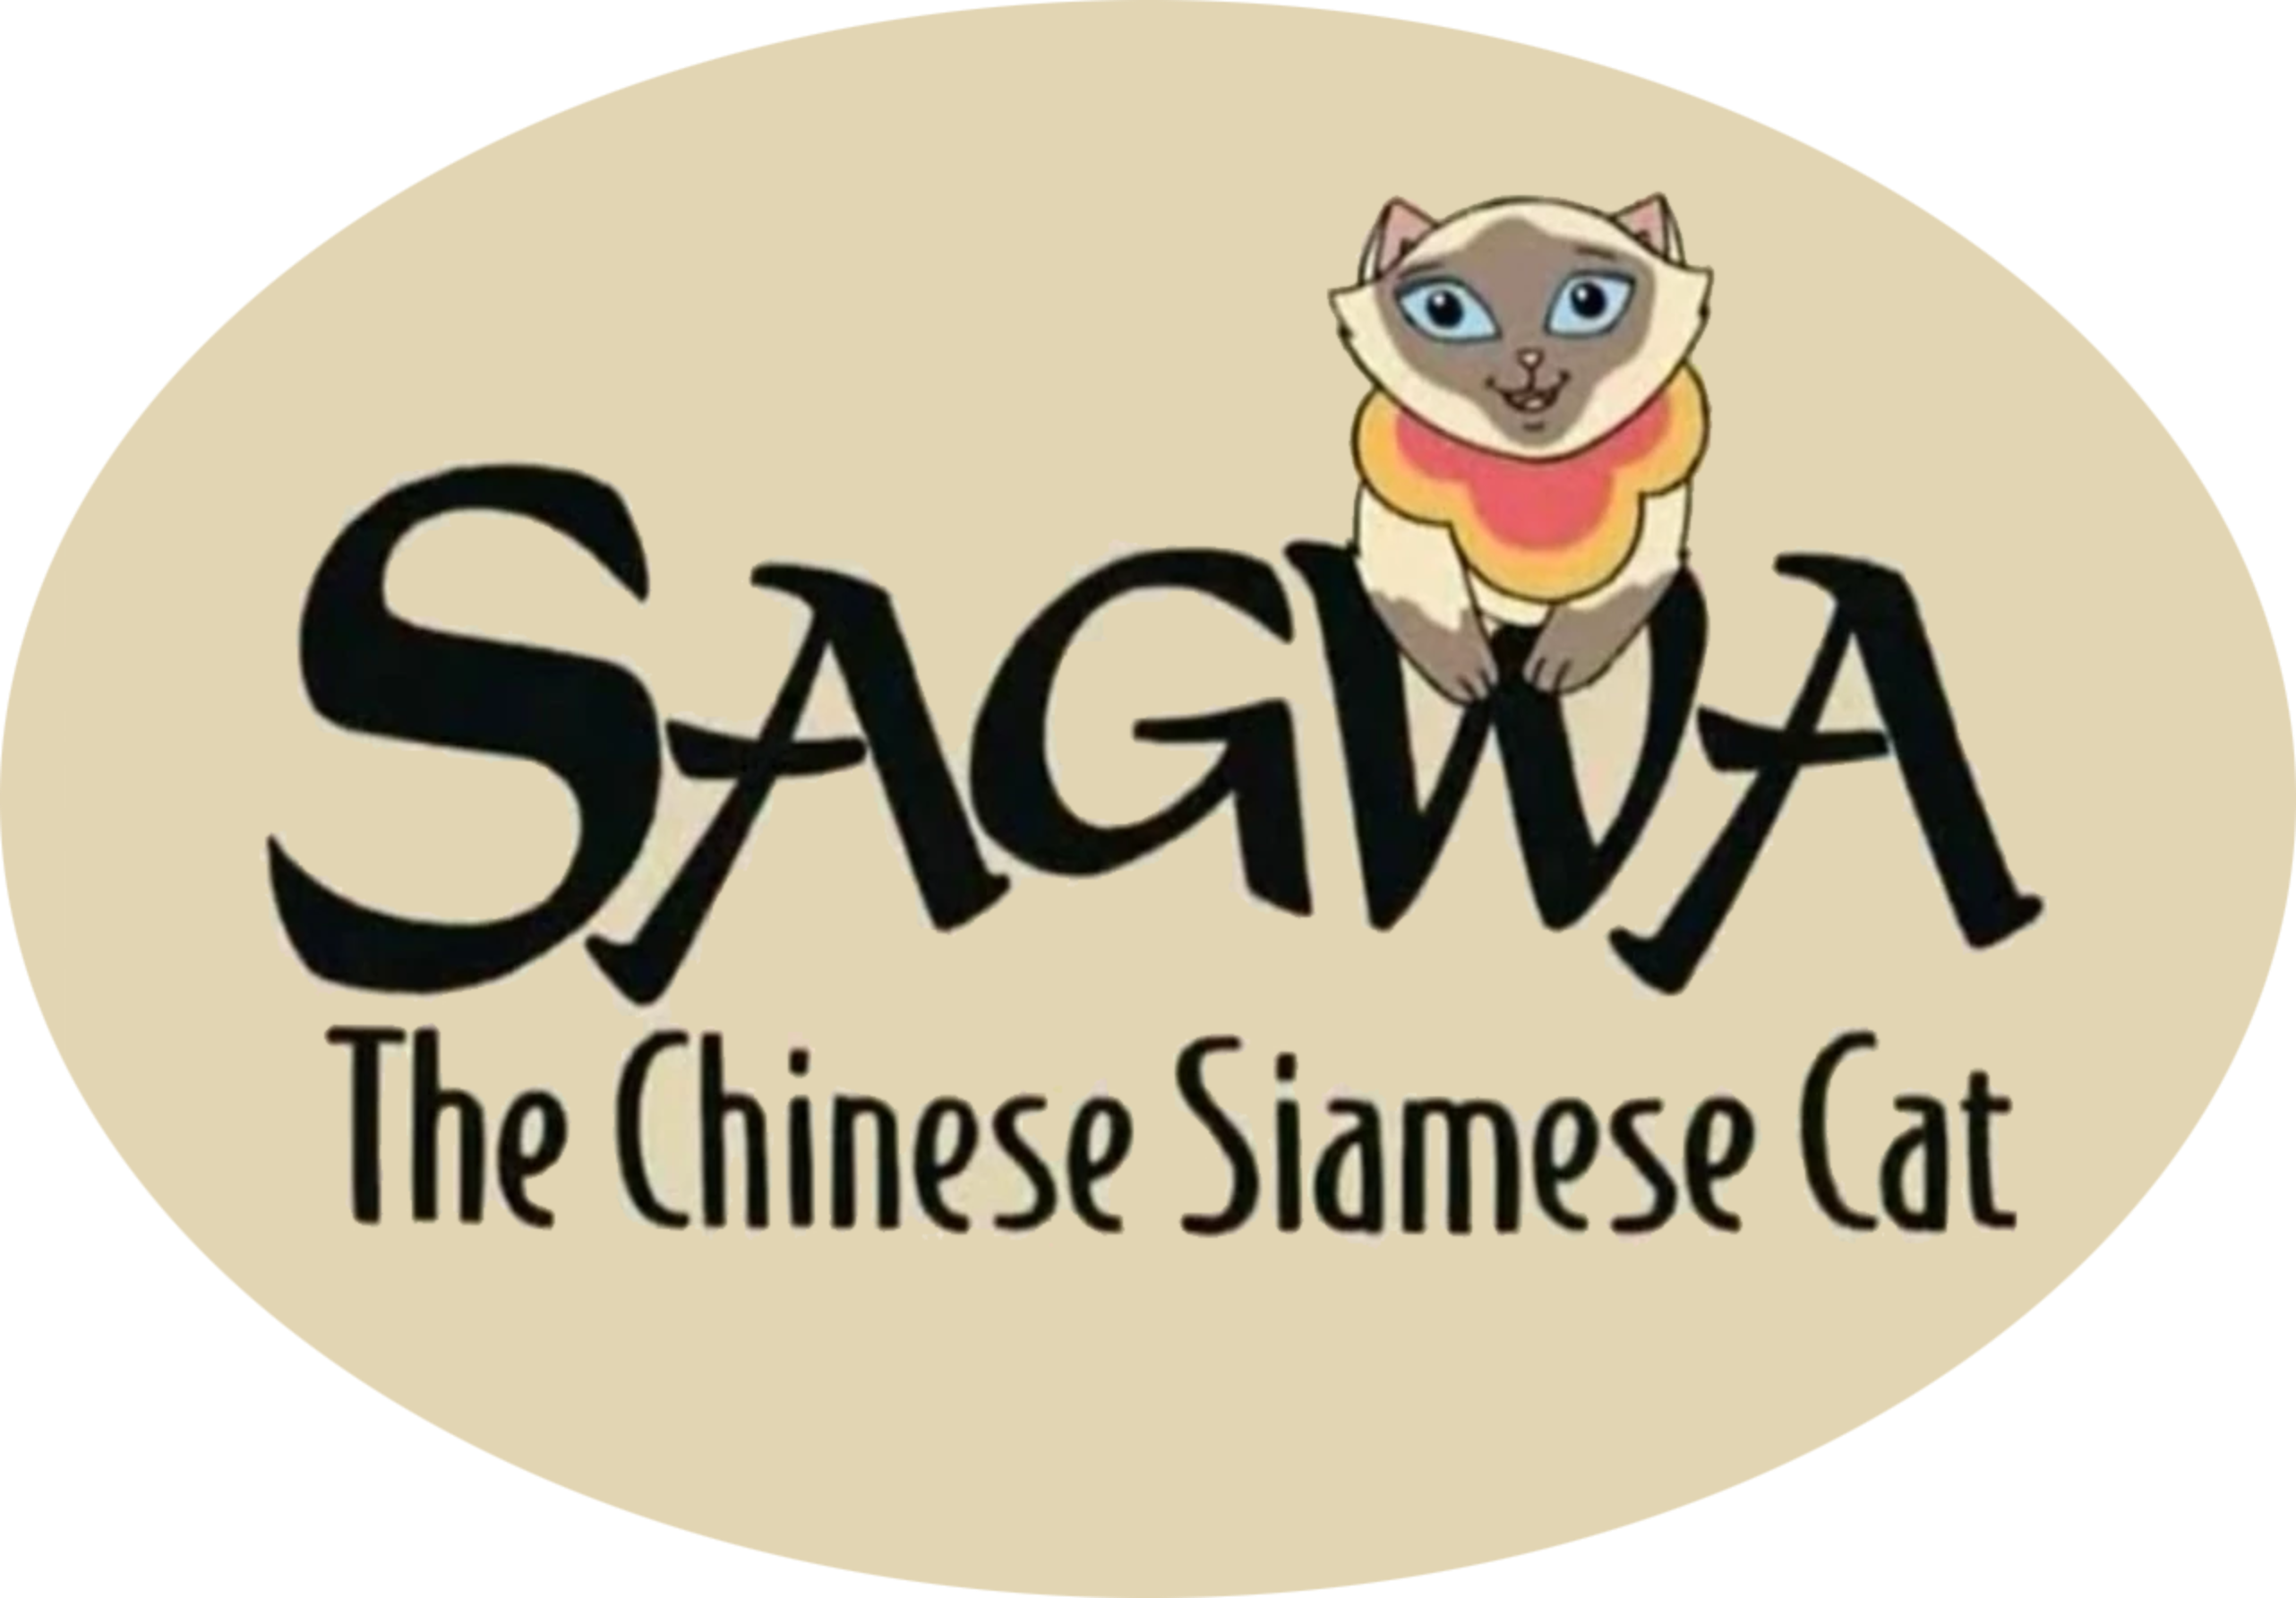 Sagwa, the Chinese Siamese Cat Complete 